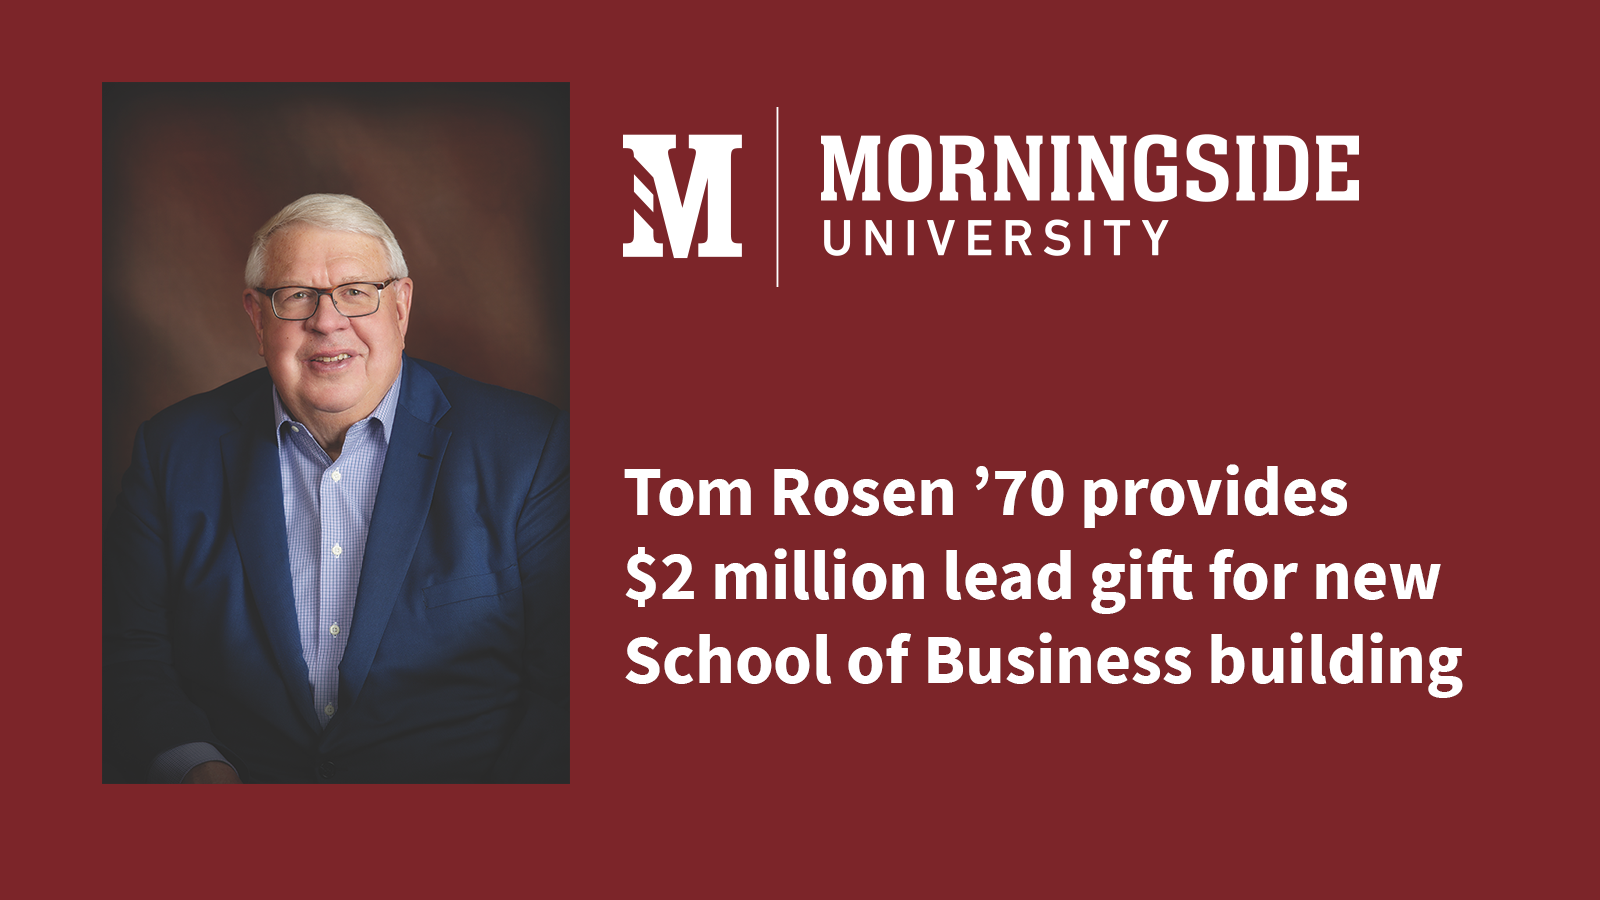 Tom Rosen '70 will provide a $2 million lead gift for a new School of Business building on campus